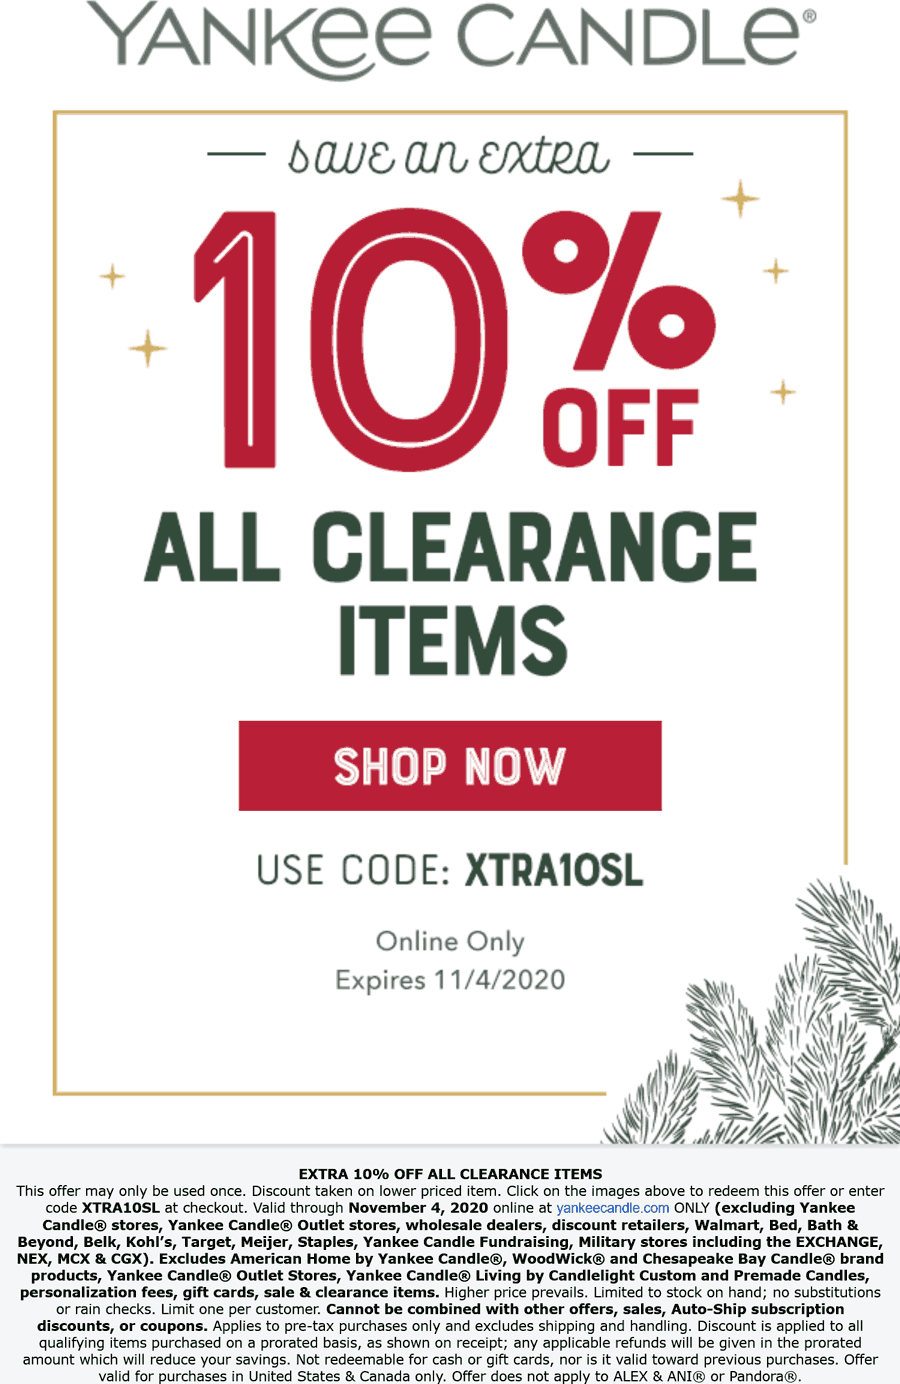 Yankee Candle stores Coupon  Extra 10% off clearance online today at Yankee Candle via promo code XTRA10SL #yankeecandle 